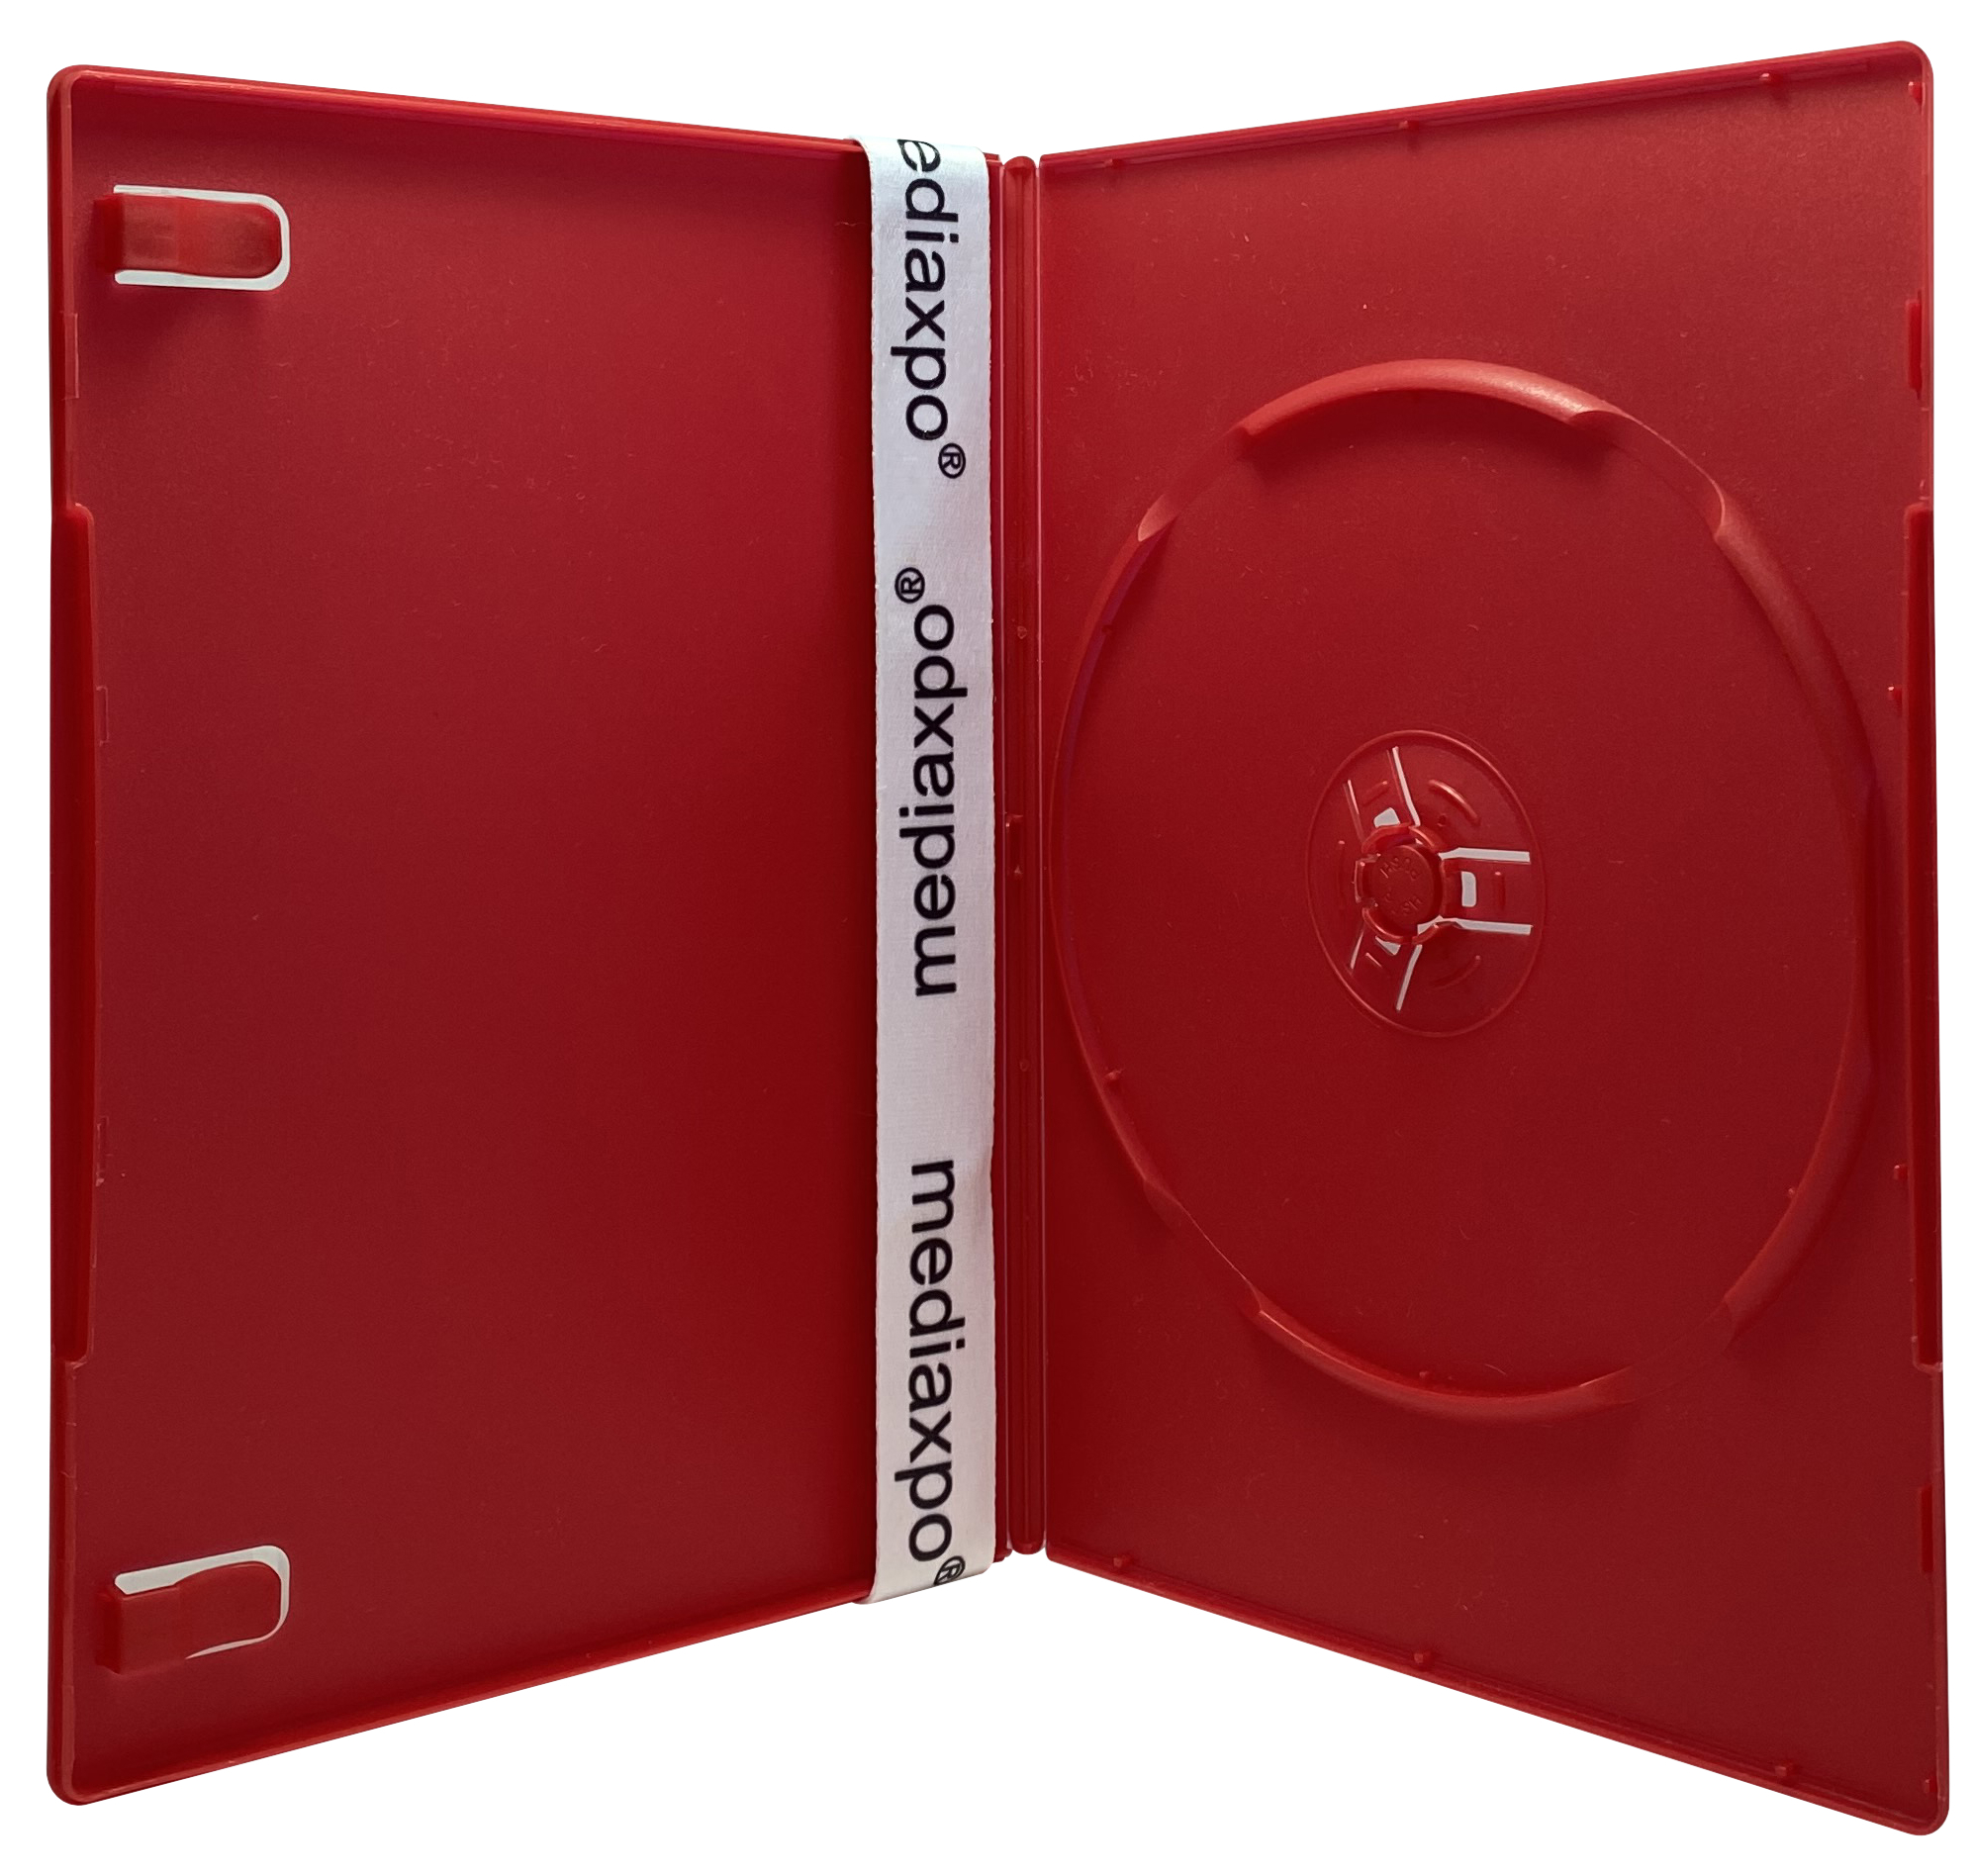 Image of ID 1214260085 200 SLIM Solid Red Color Single DVD Cases 7MM